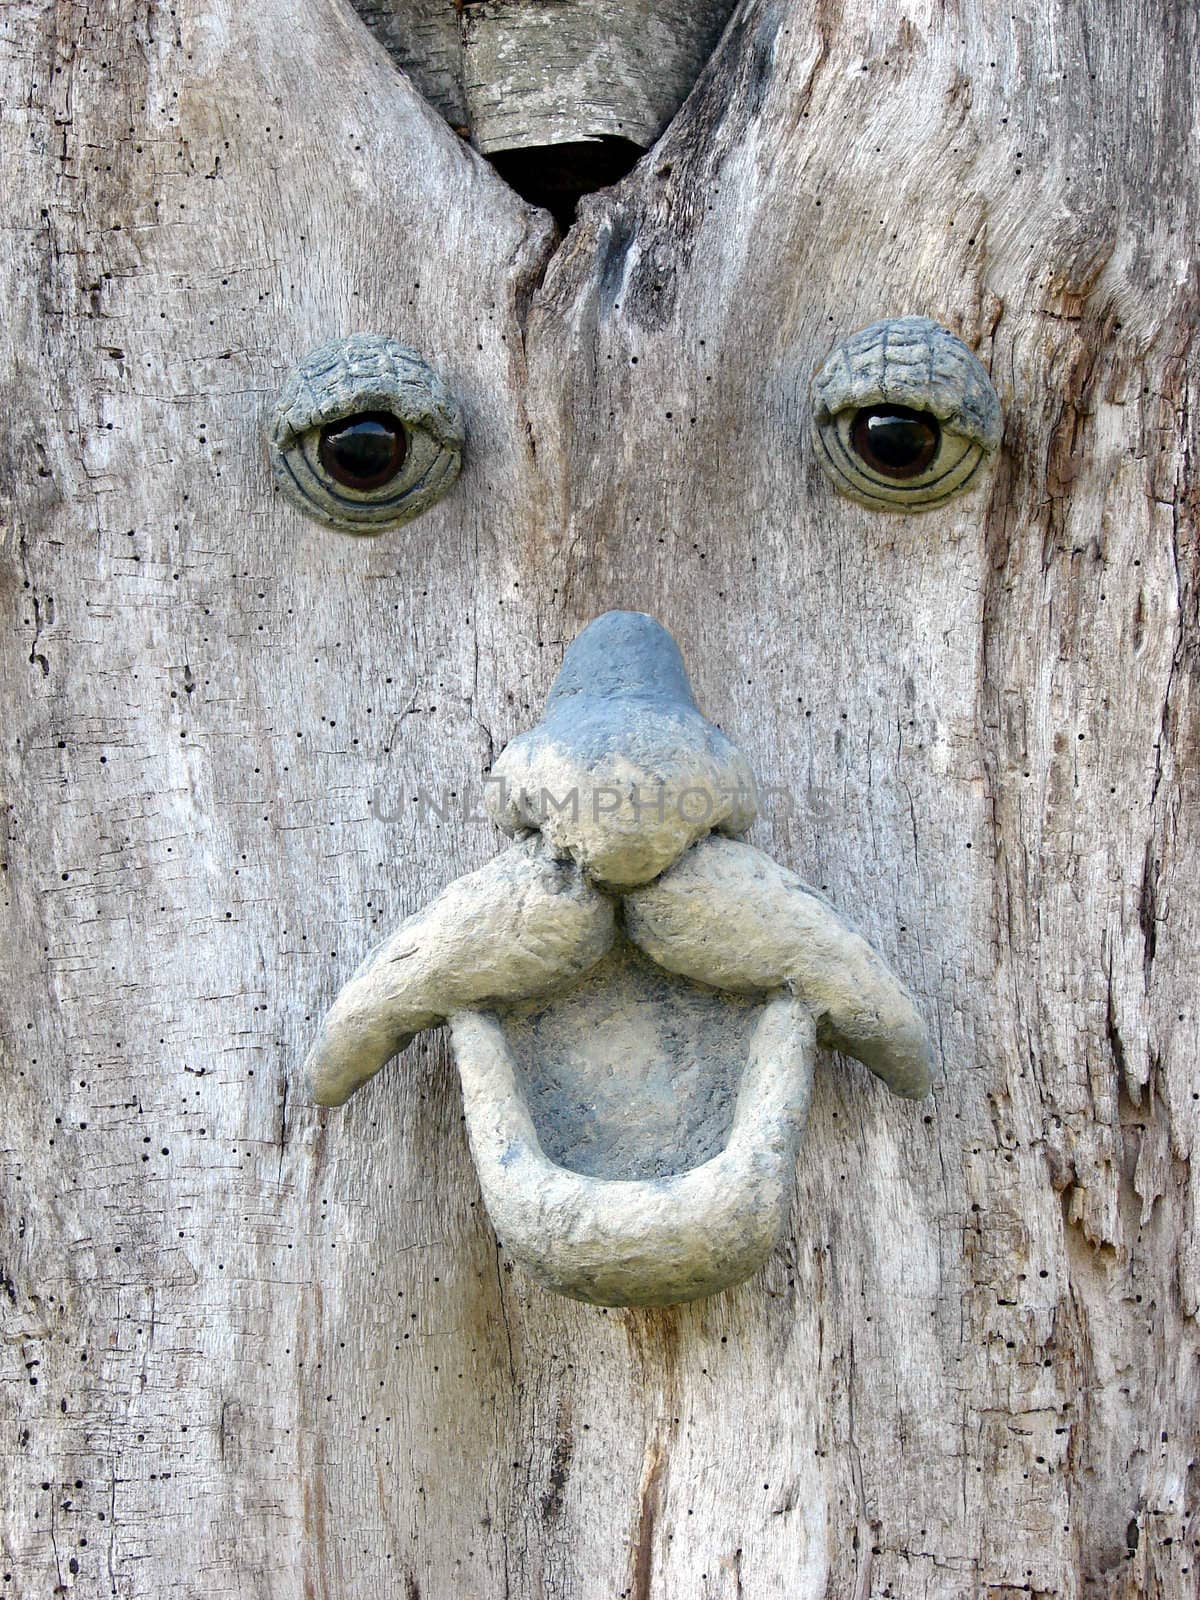 Face in a tree 2 by Thorvis